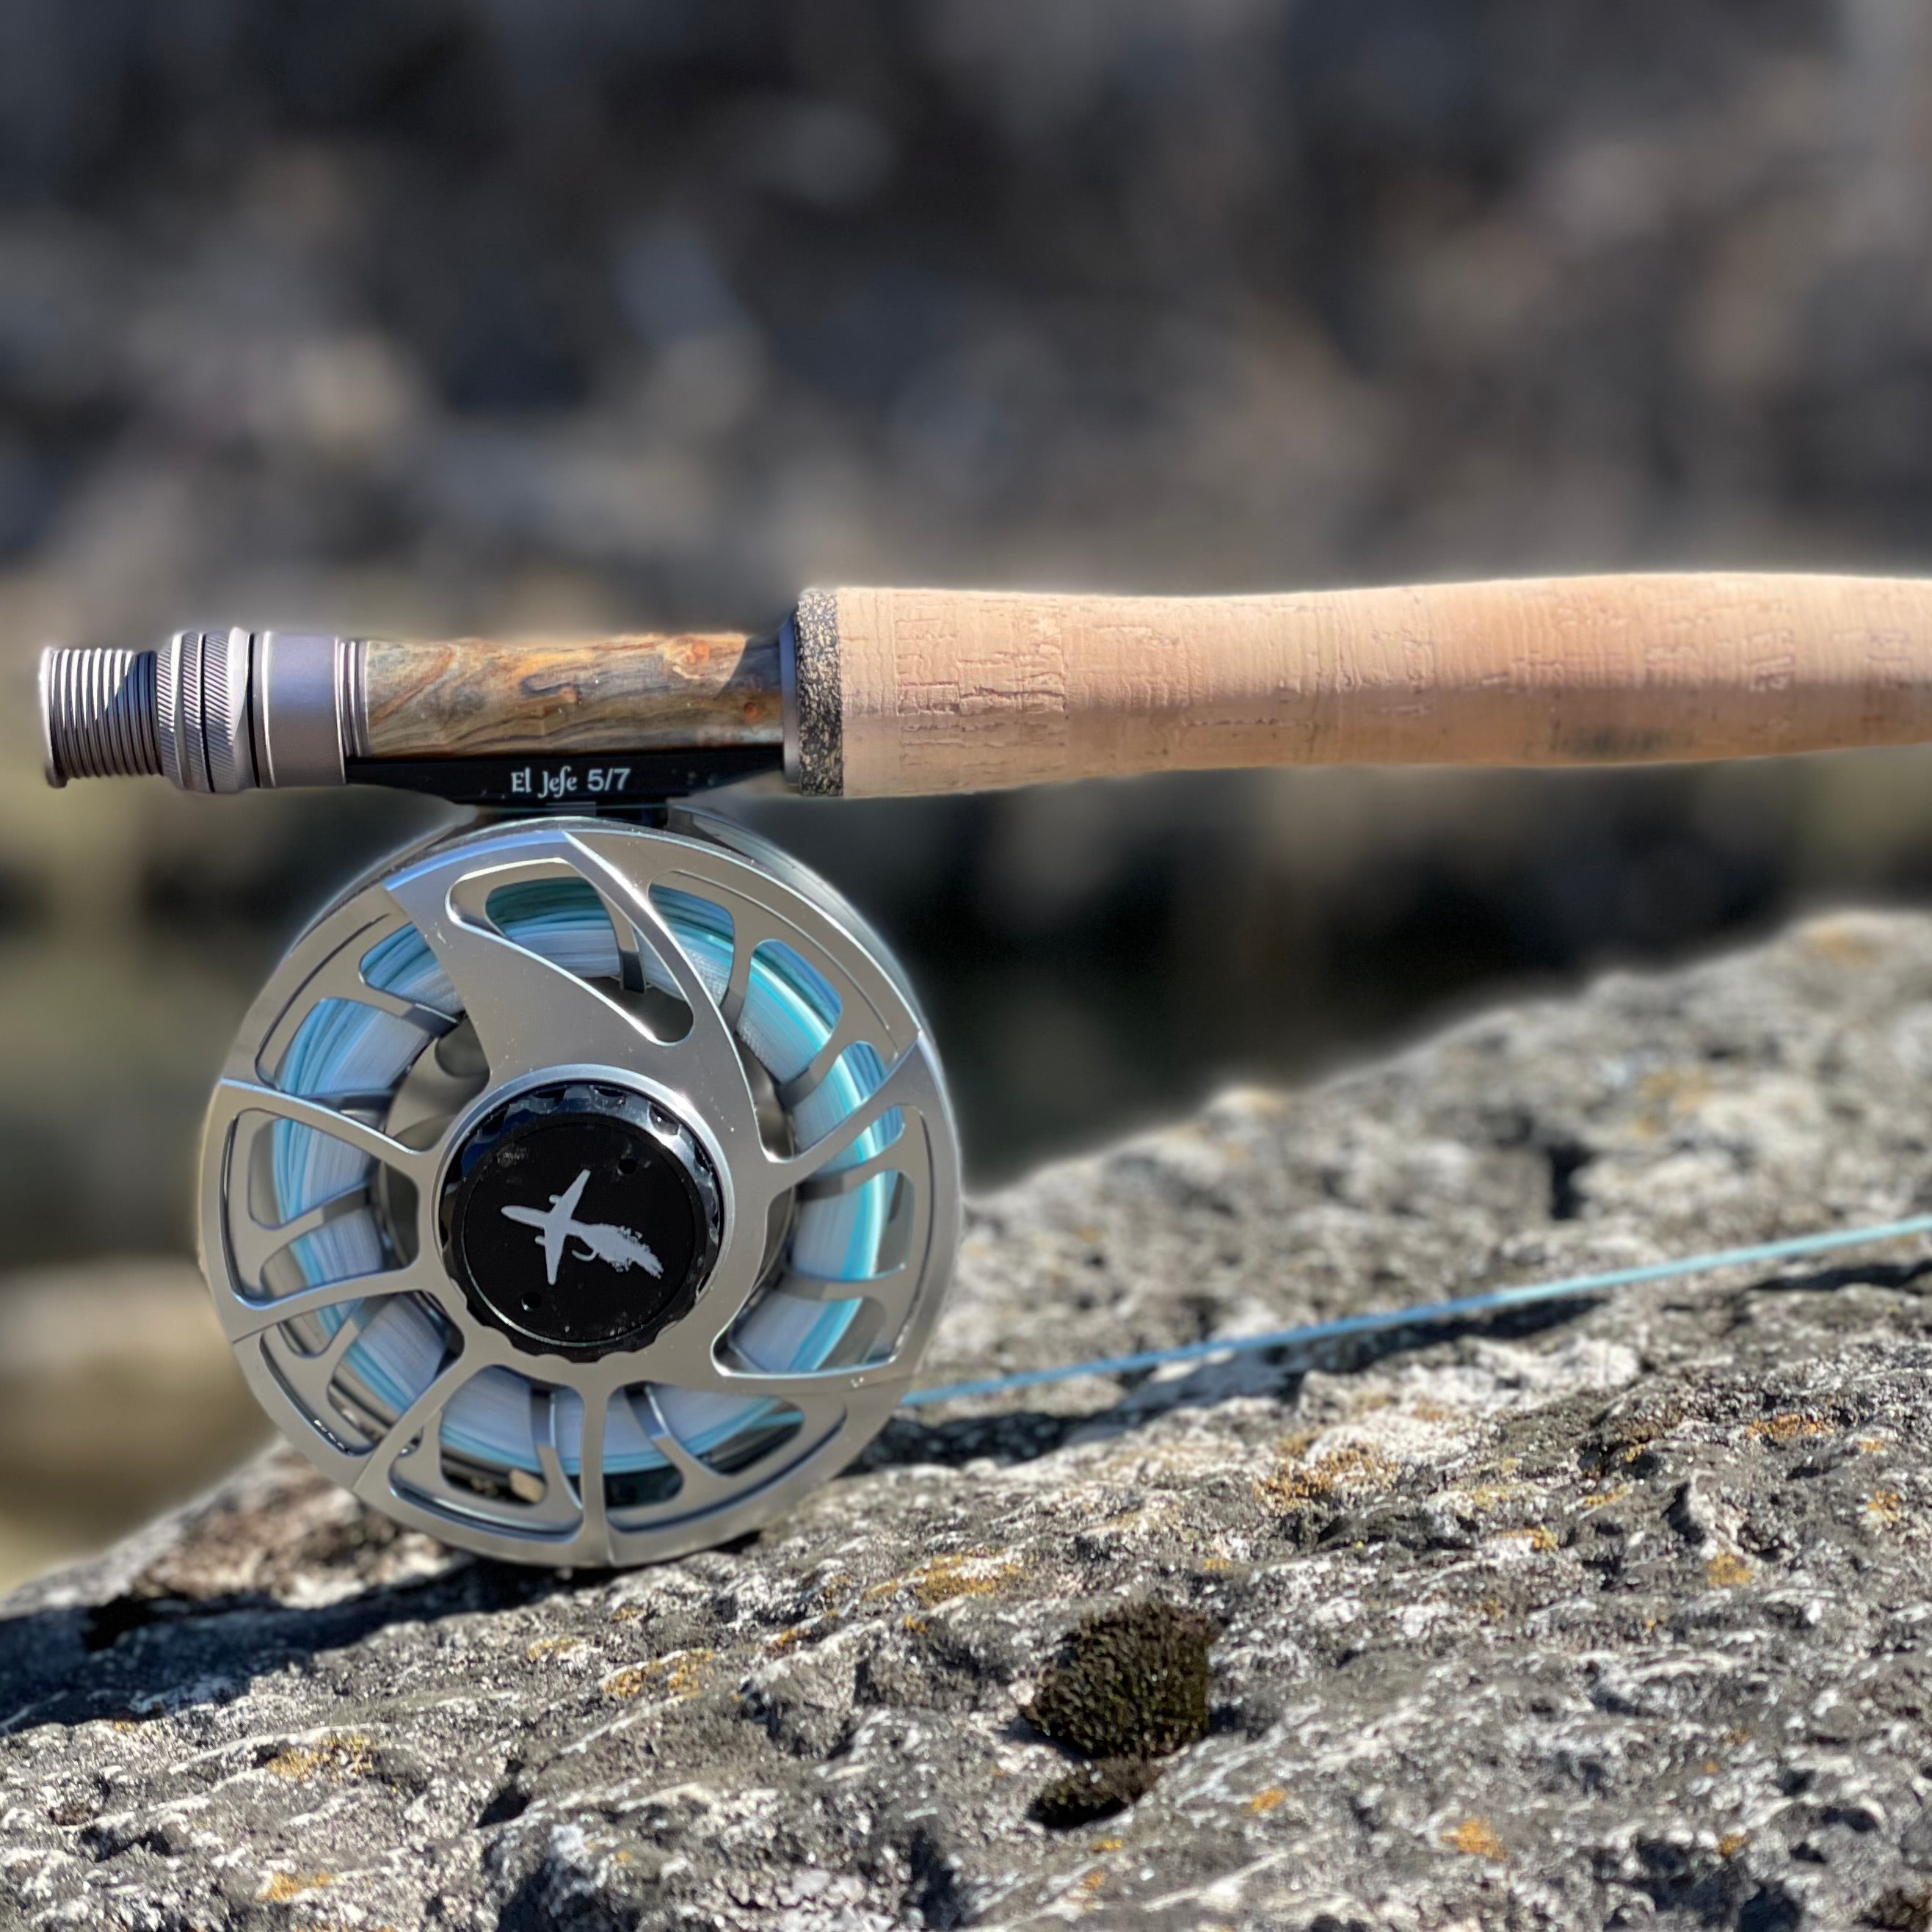 Fly Fishing Rod Reel Seat, This is a reels seat for a fly f…